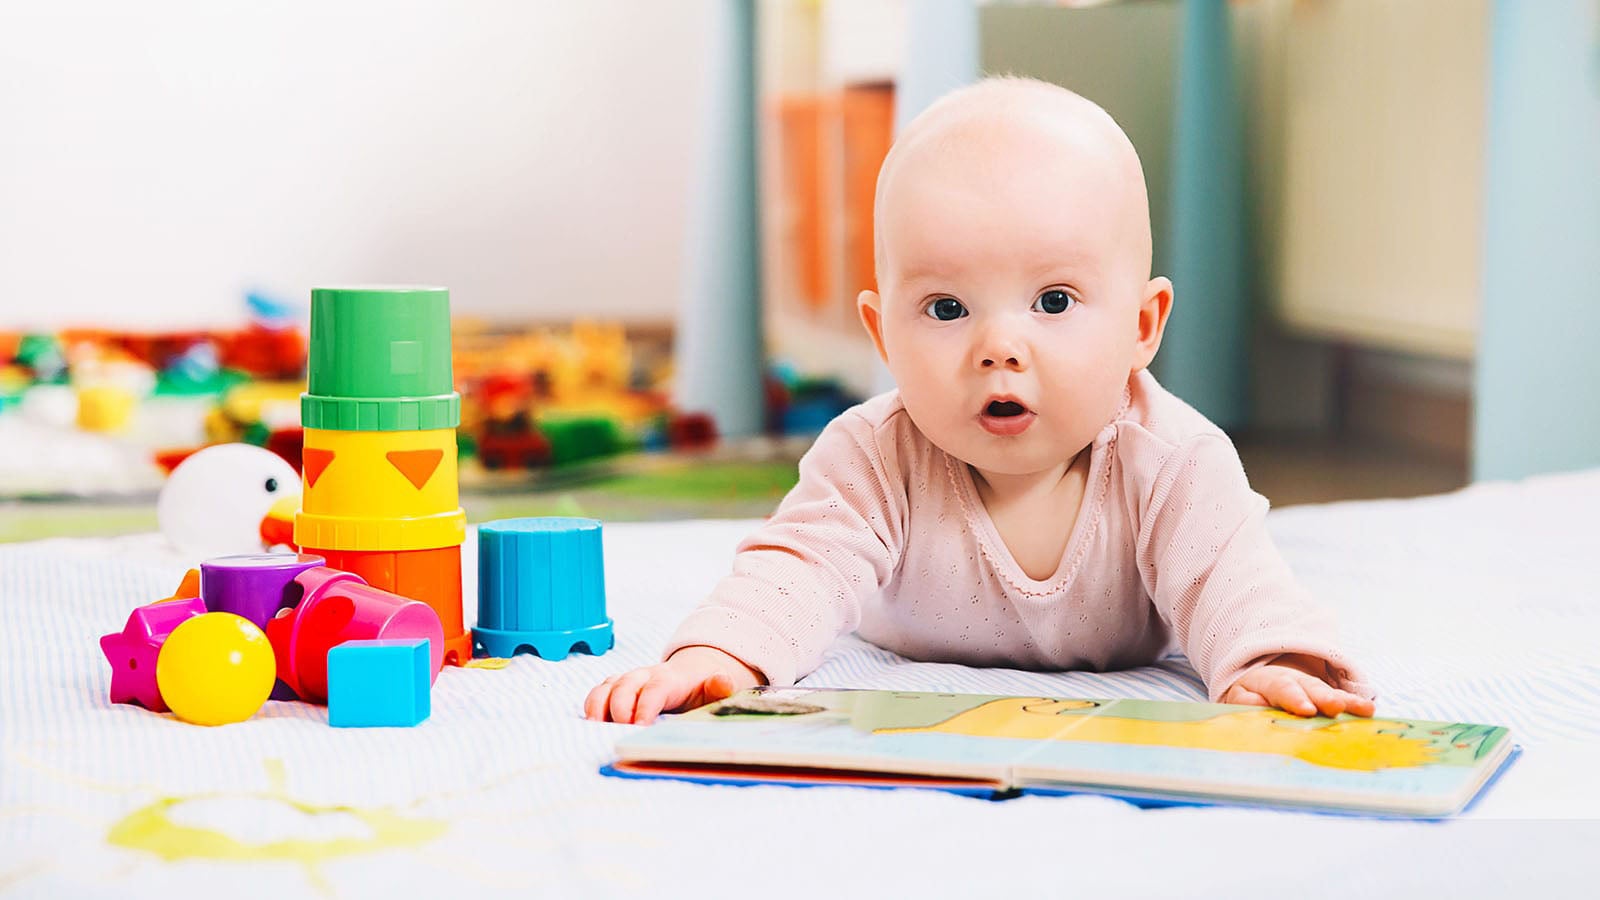 Baby led on floor with an open book and stacking toys